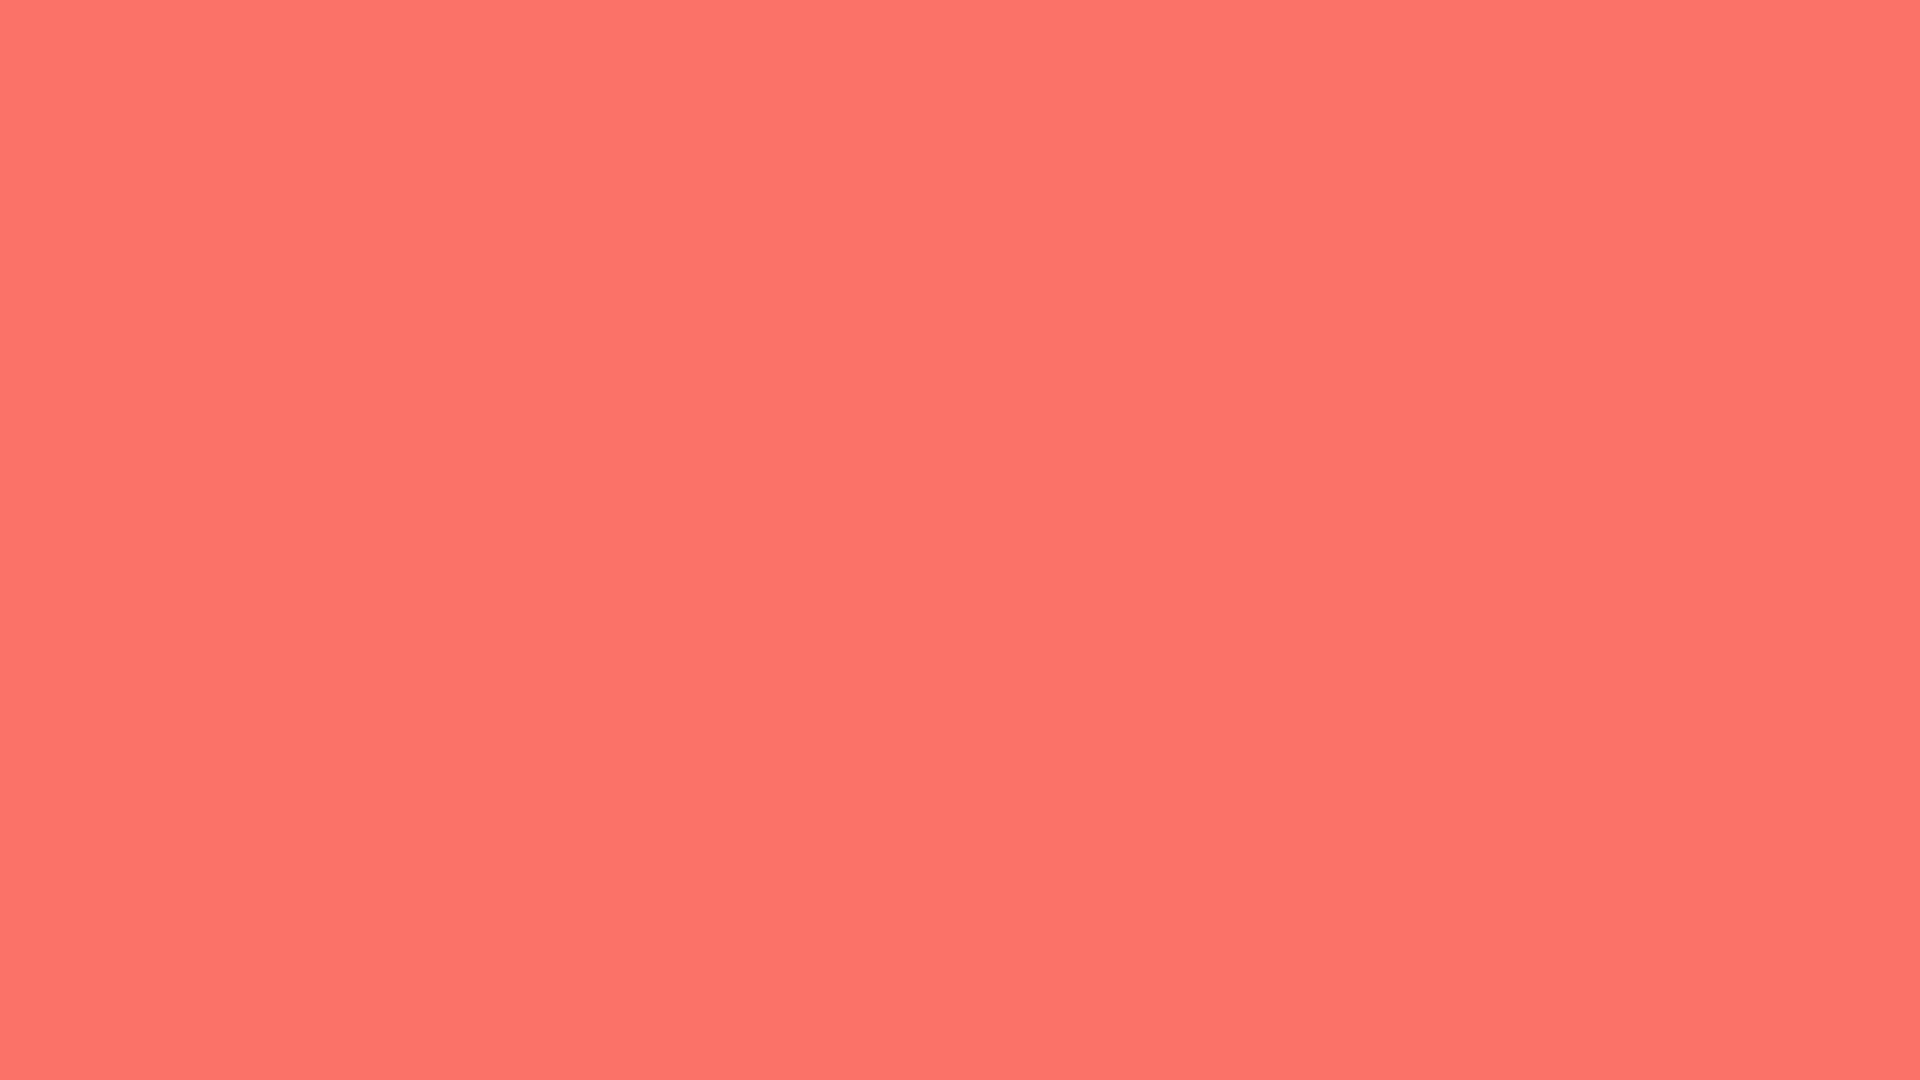 coral color wallpaper,red,pink,orange,peach,text